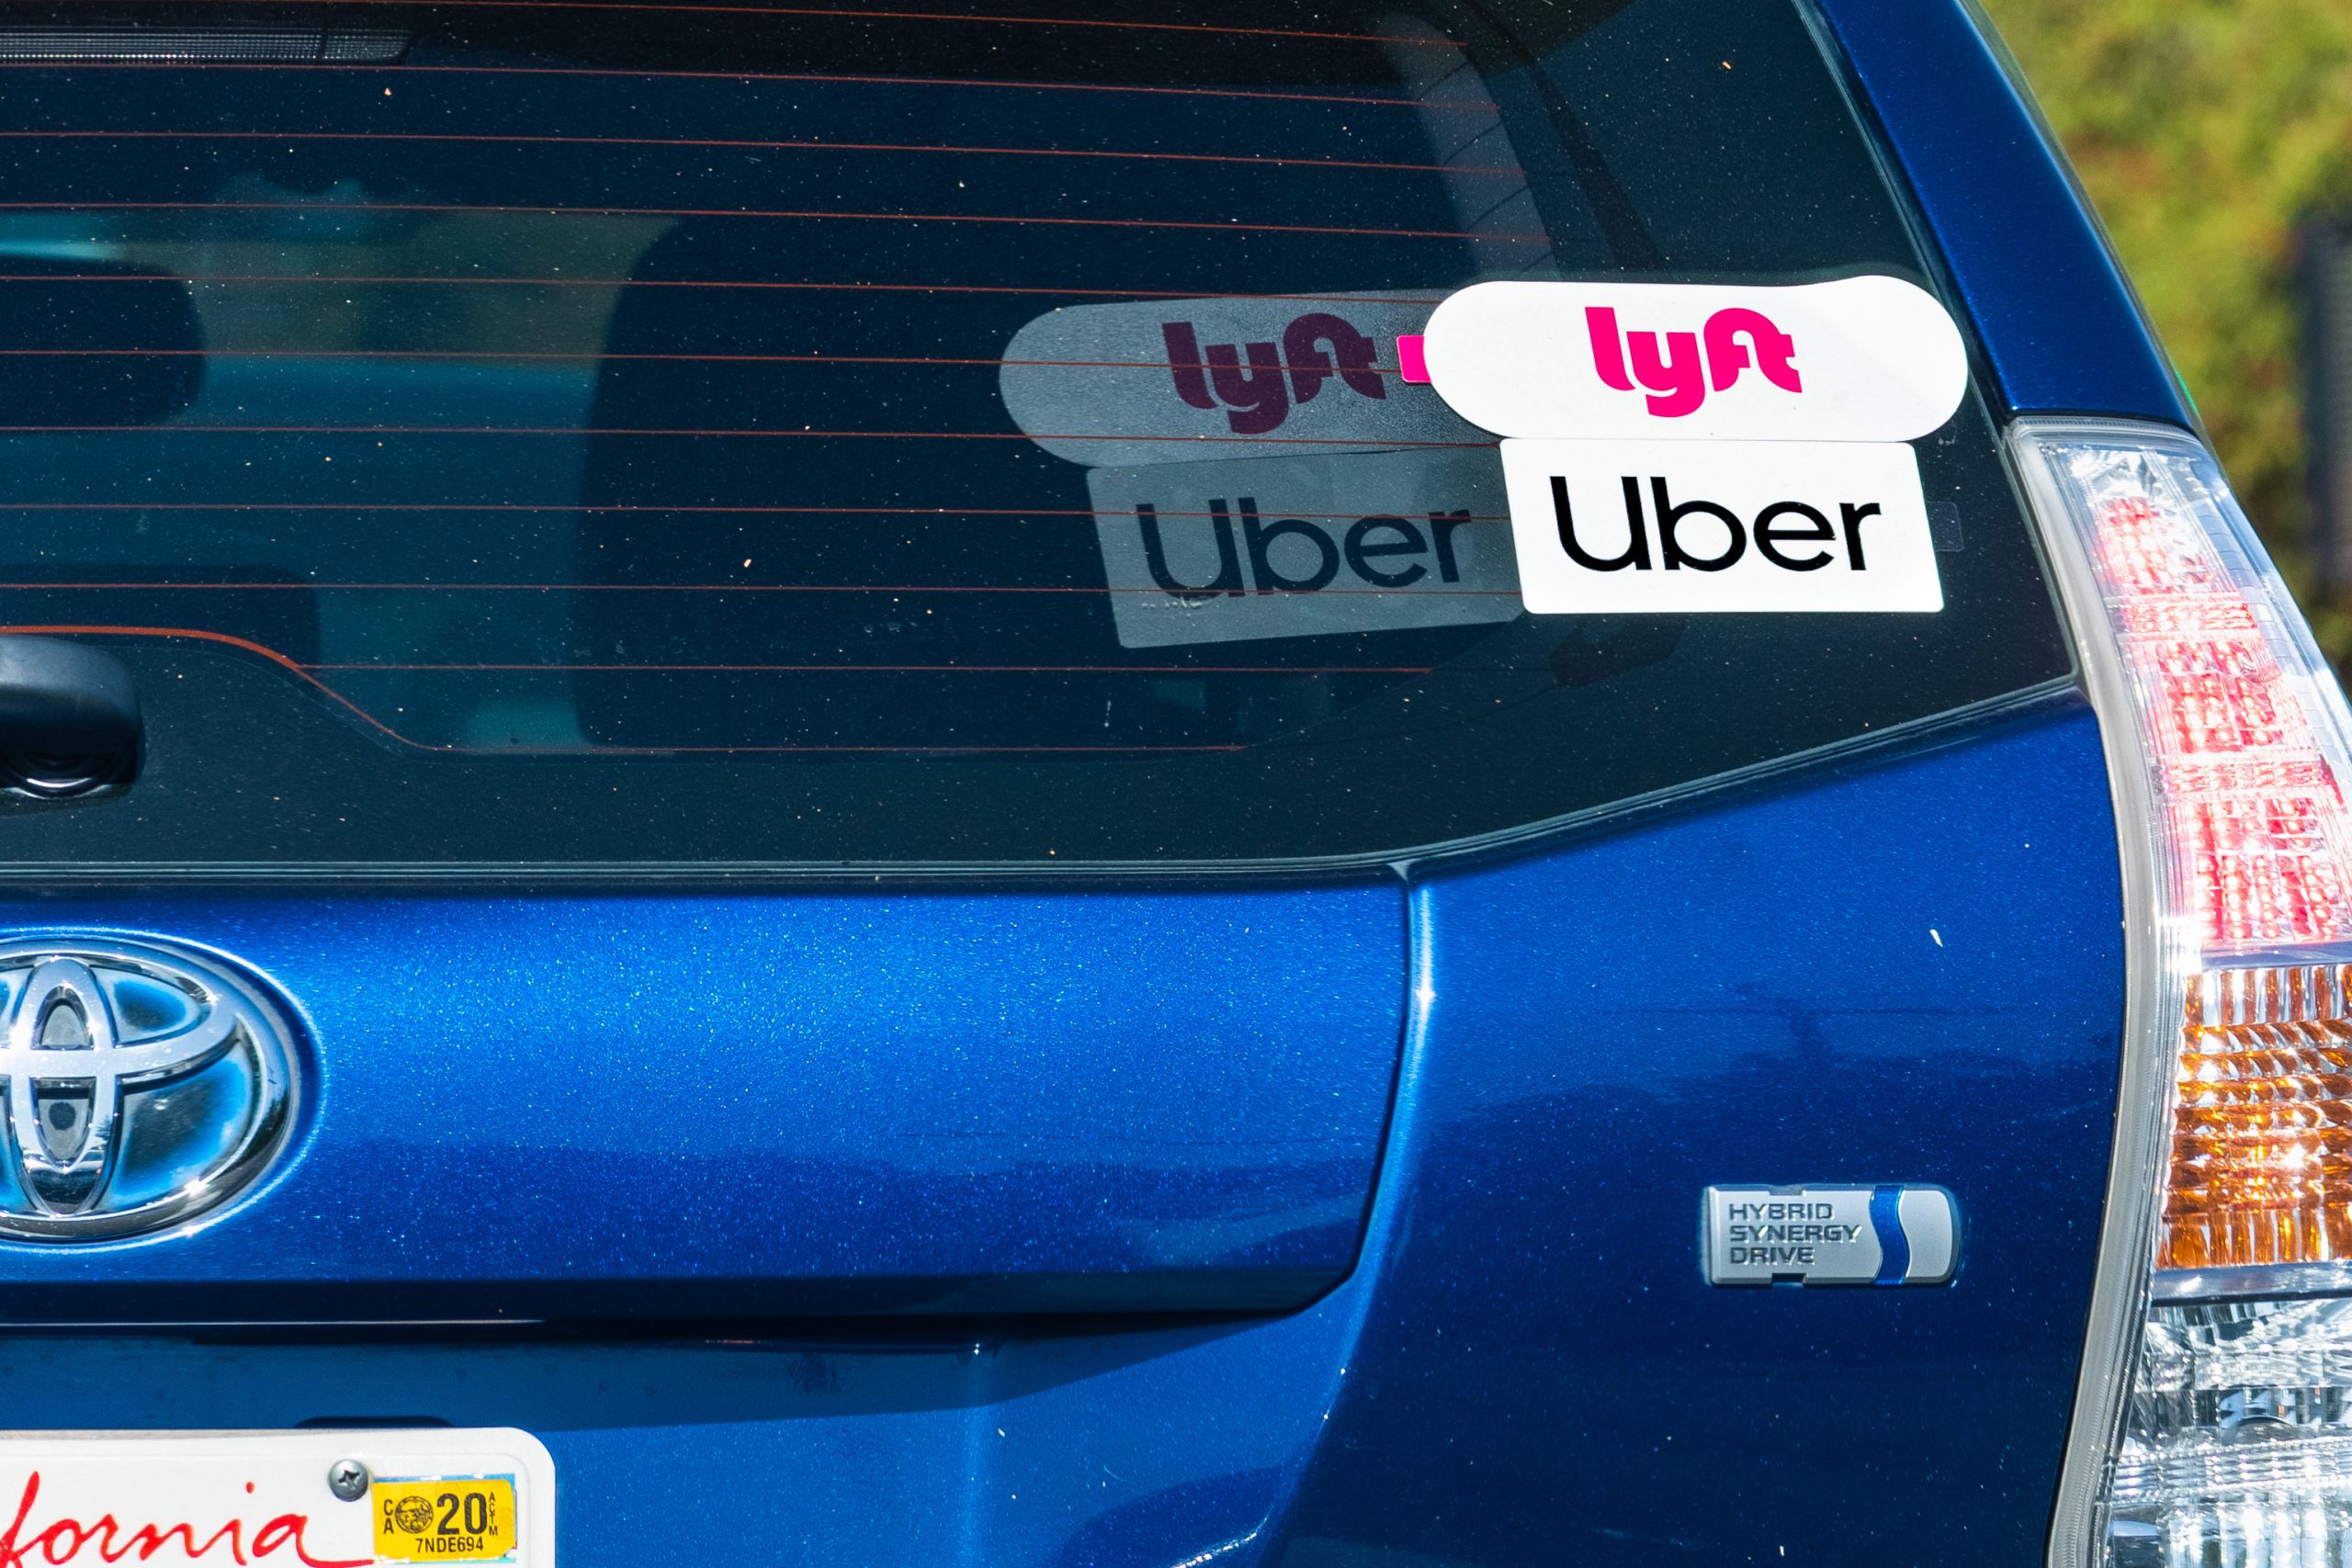 Court upholds Prop. 22 in big win for gig firms like Lyft and Uber